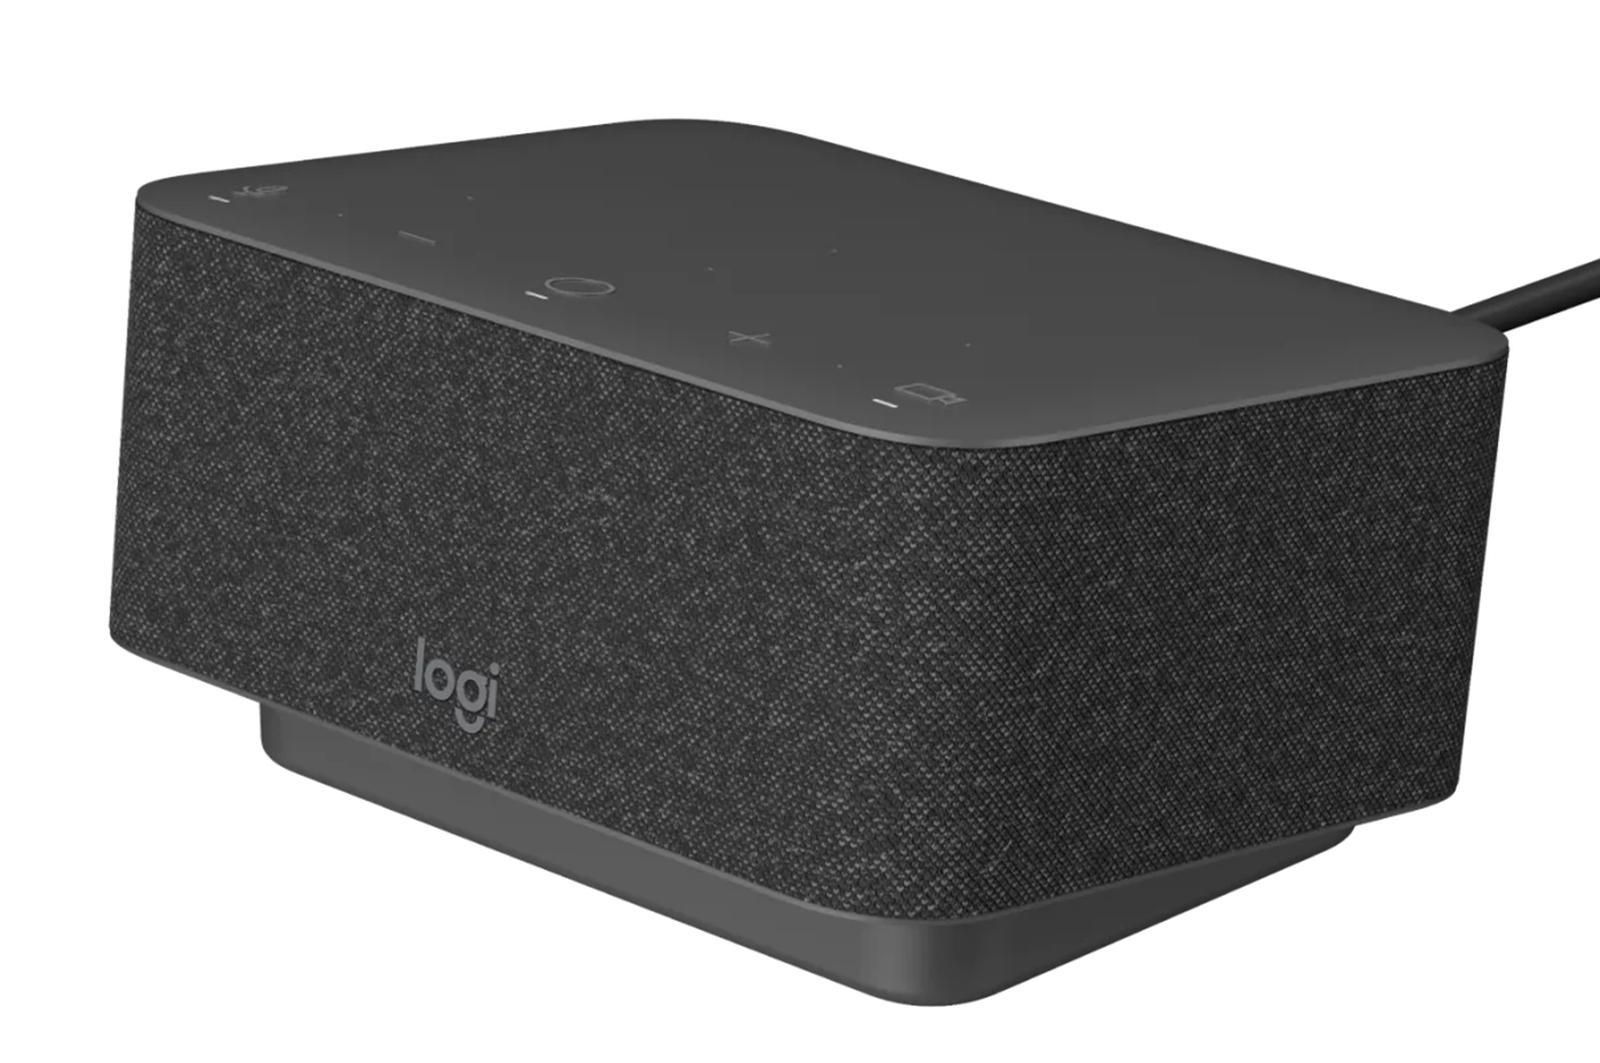 Logitech Logi Dock review, an out-of-office cable (real)